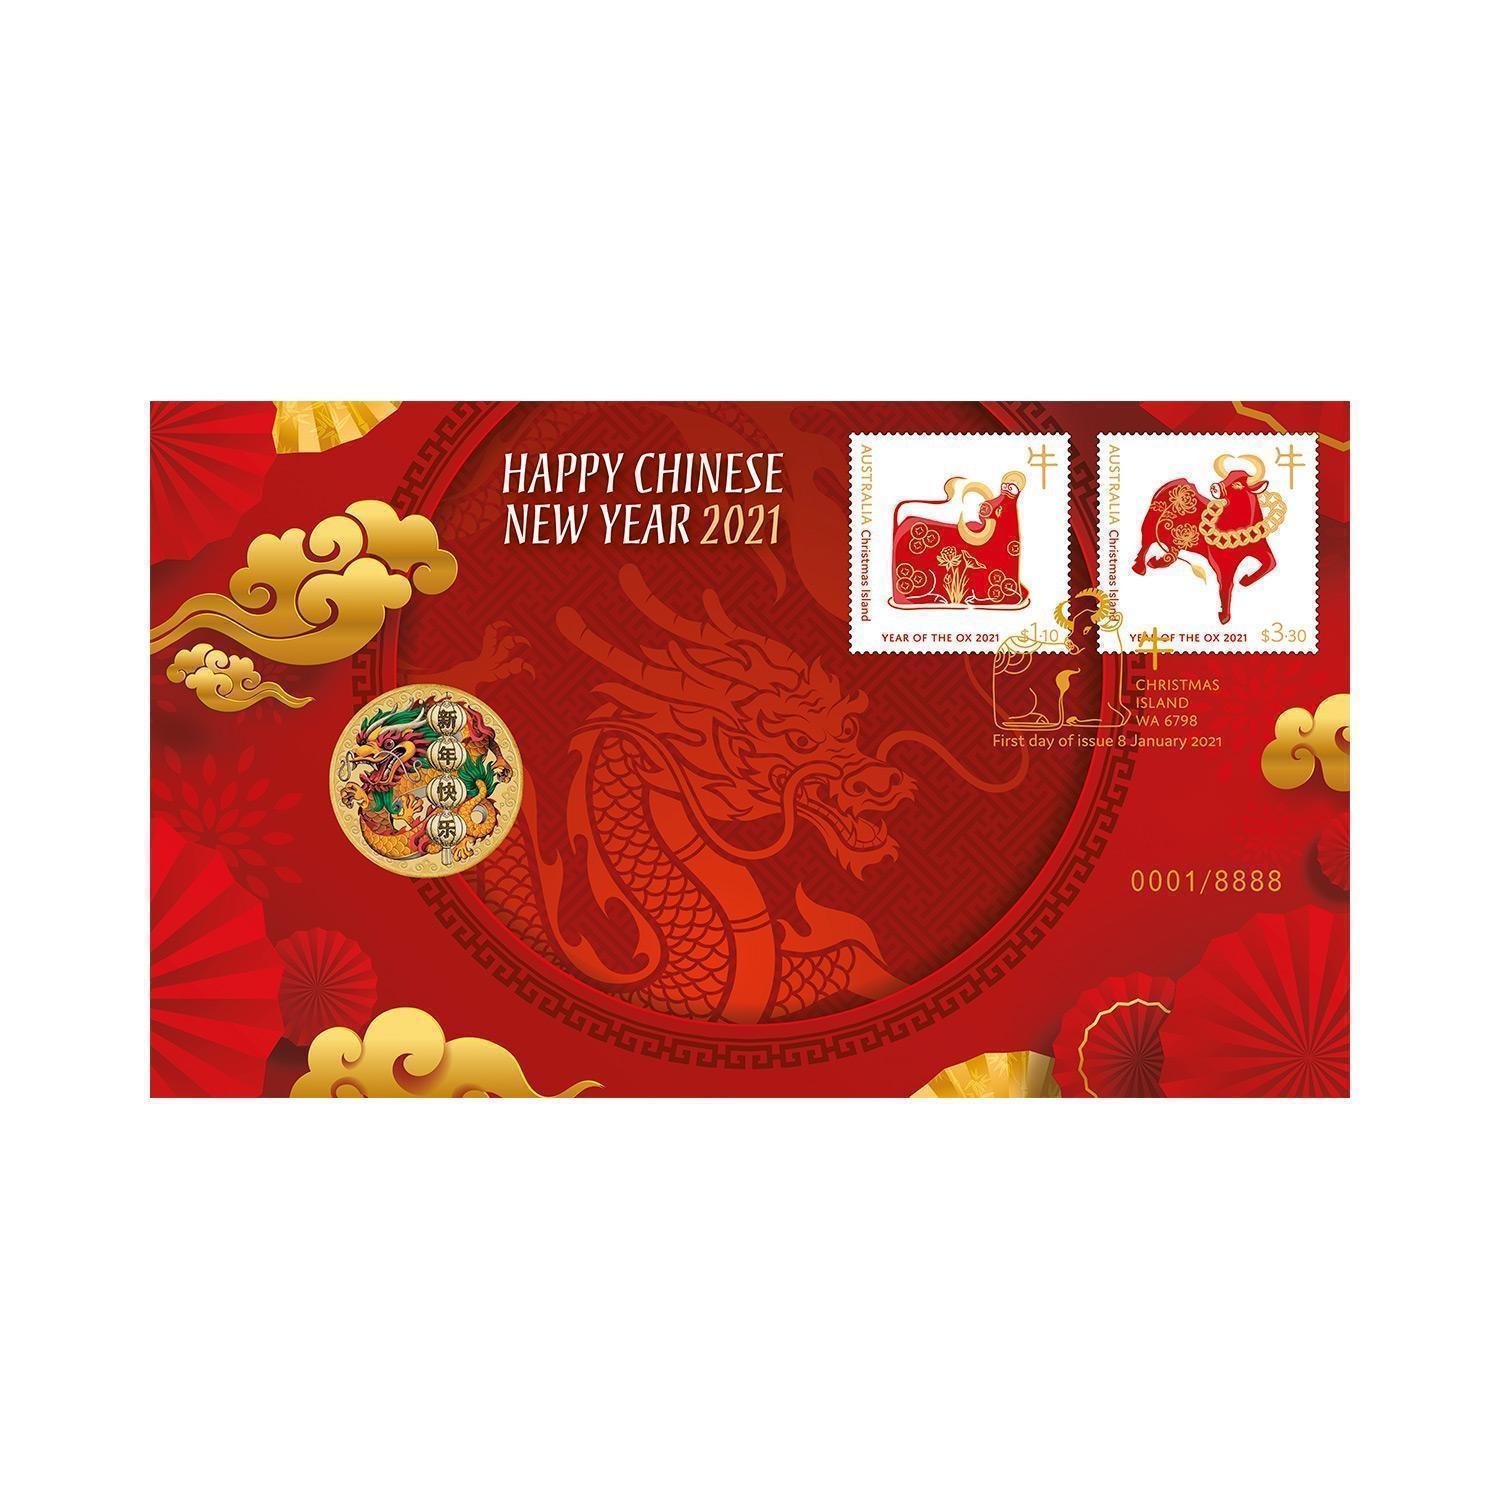 2021 $1 Year of the Ox Chinese New Year Stamp & Coin Cover PNC